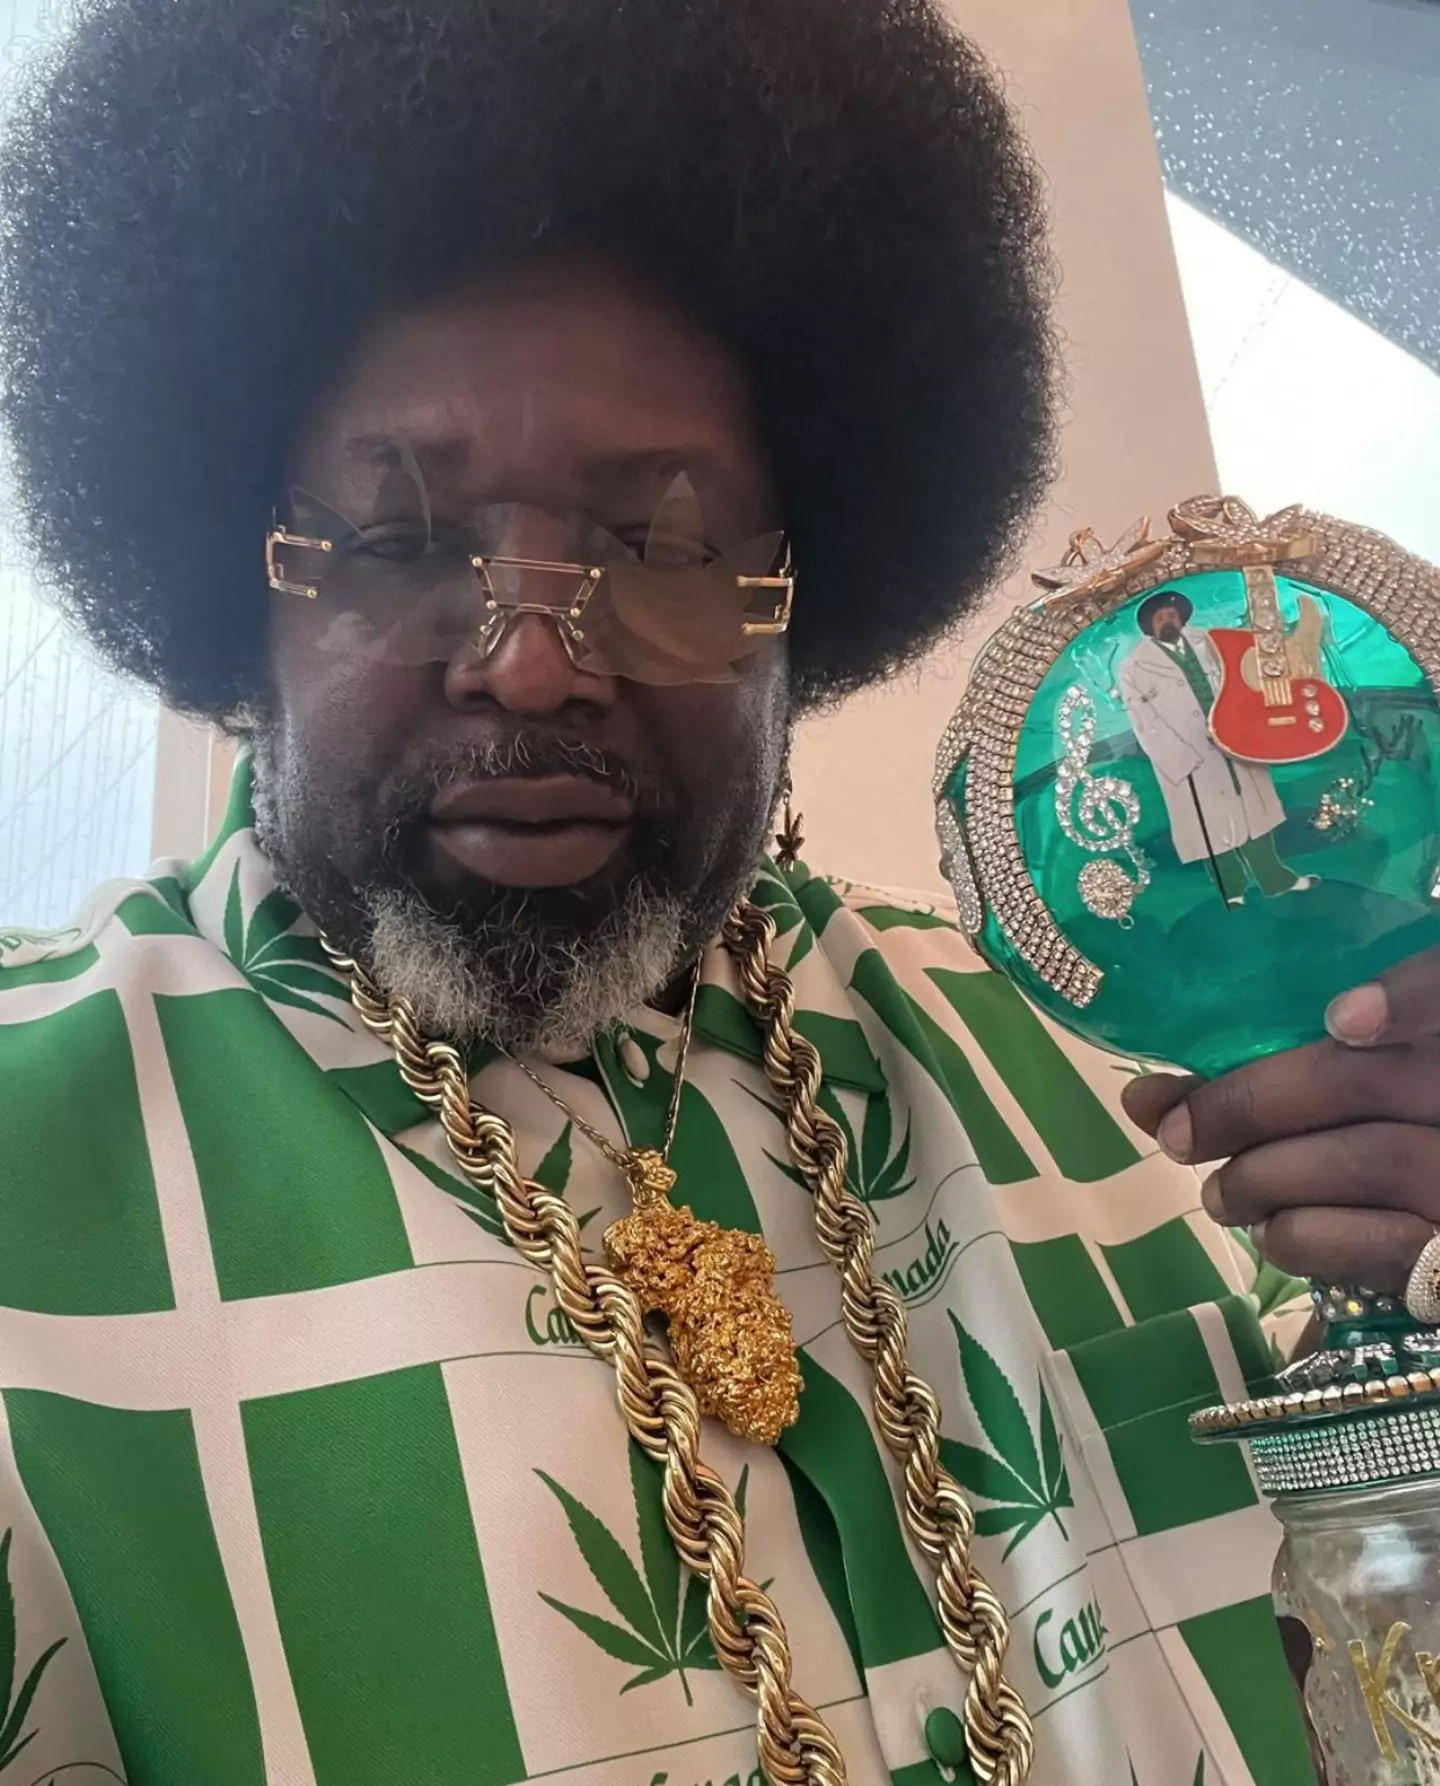 Could Afroman be the next President?